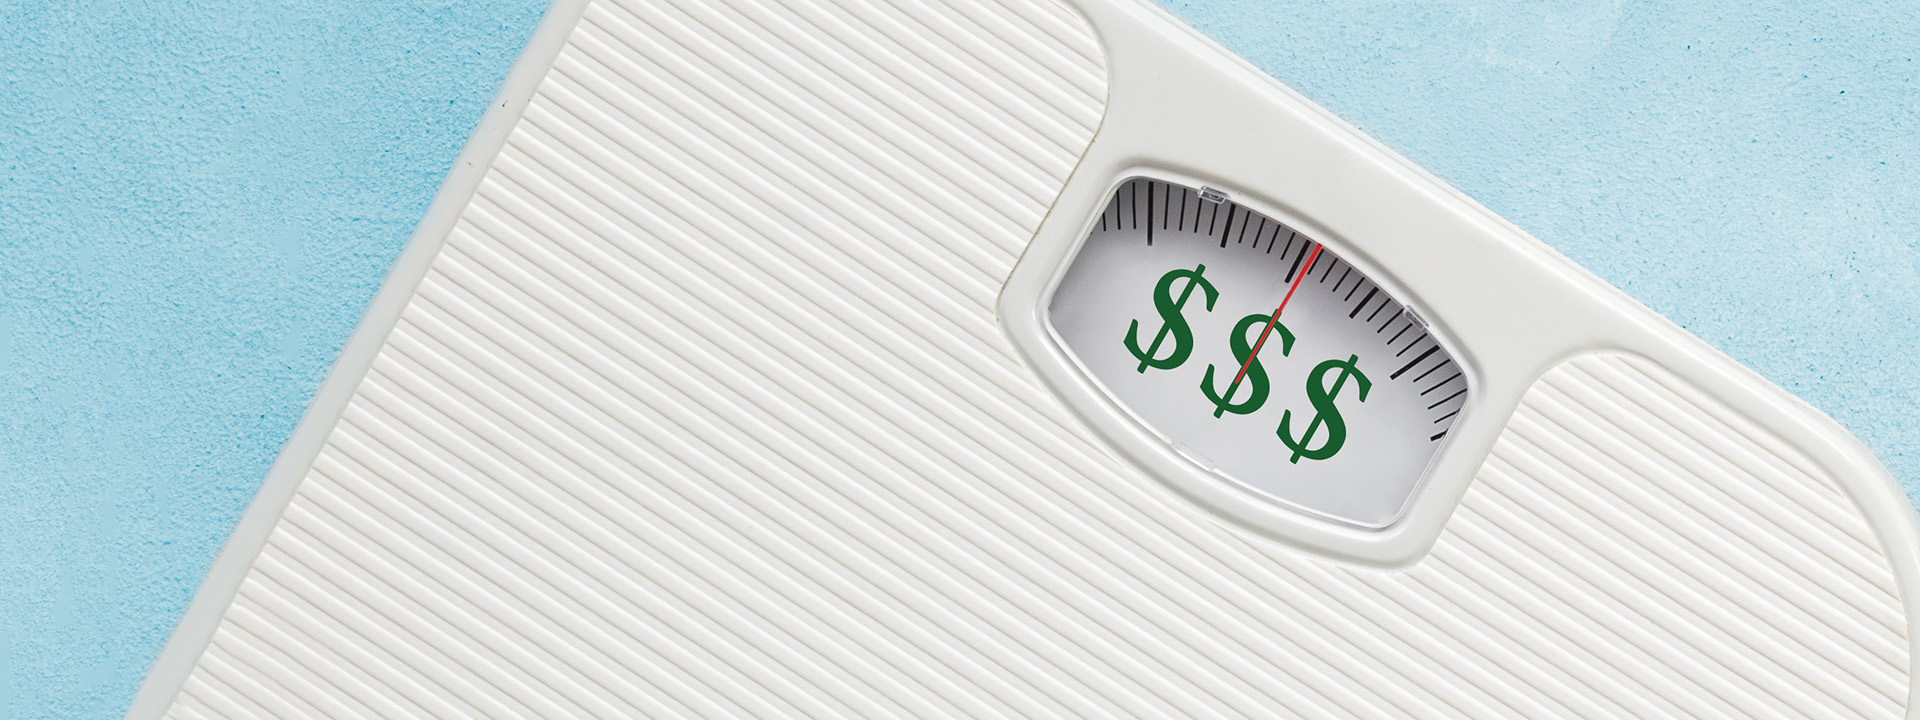 Weight scale showing money signs